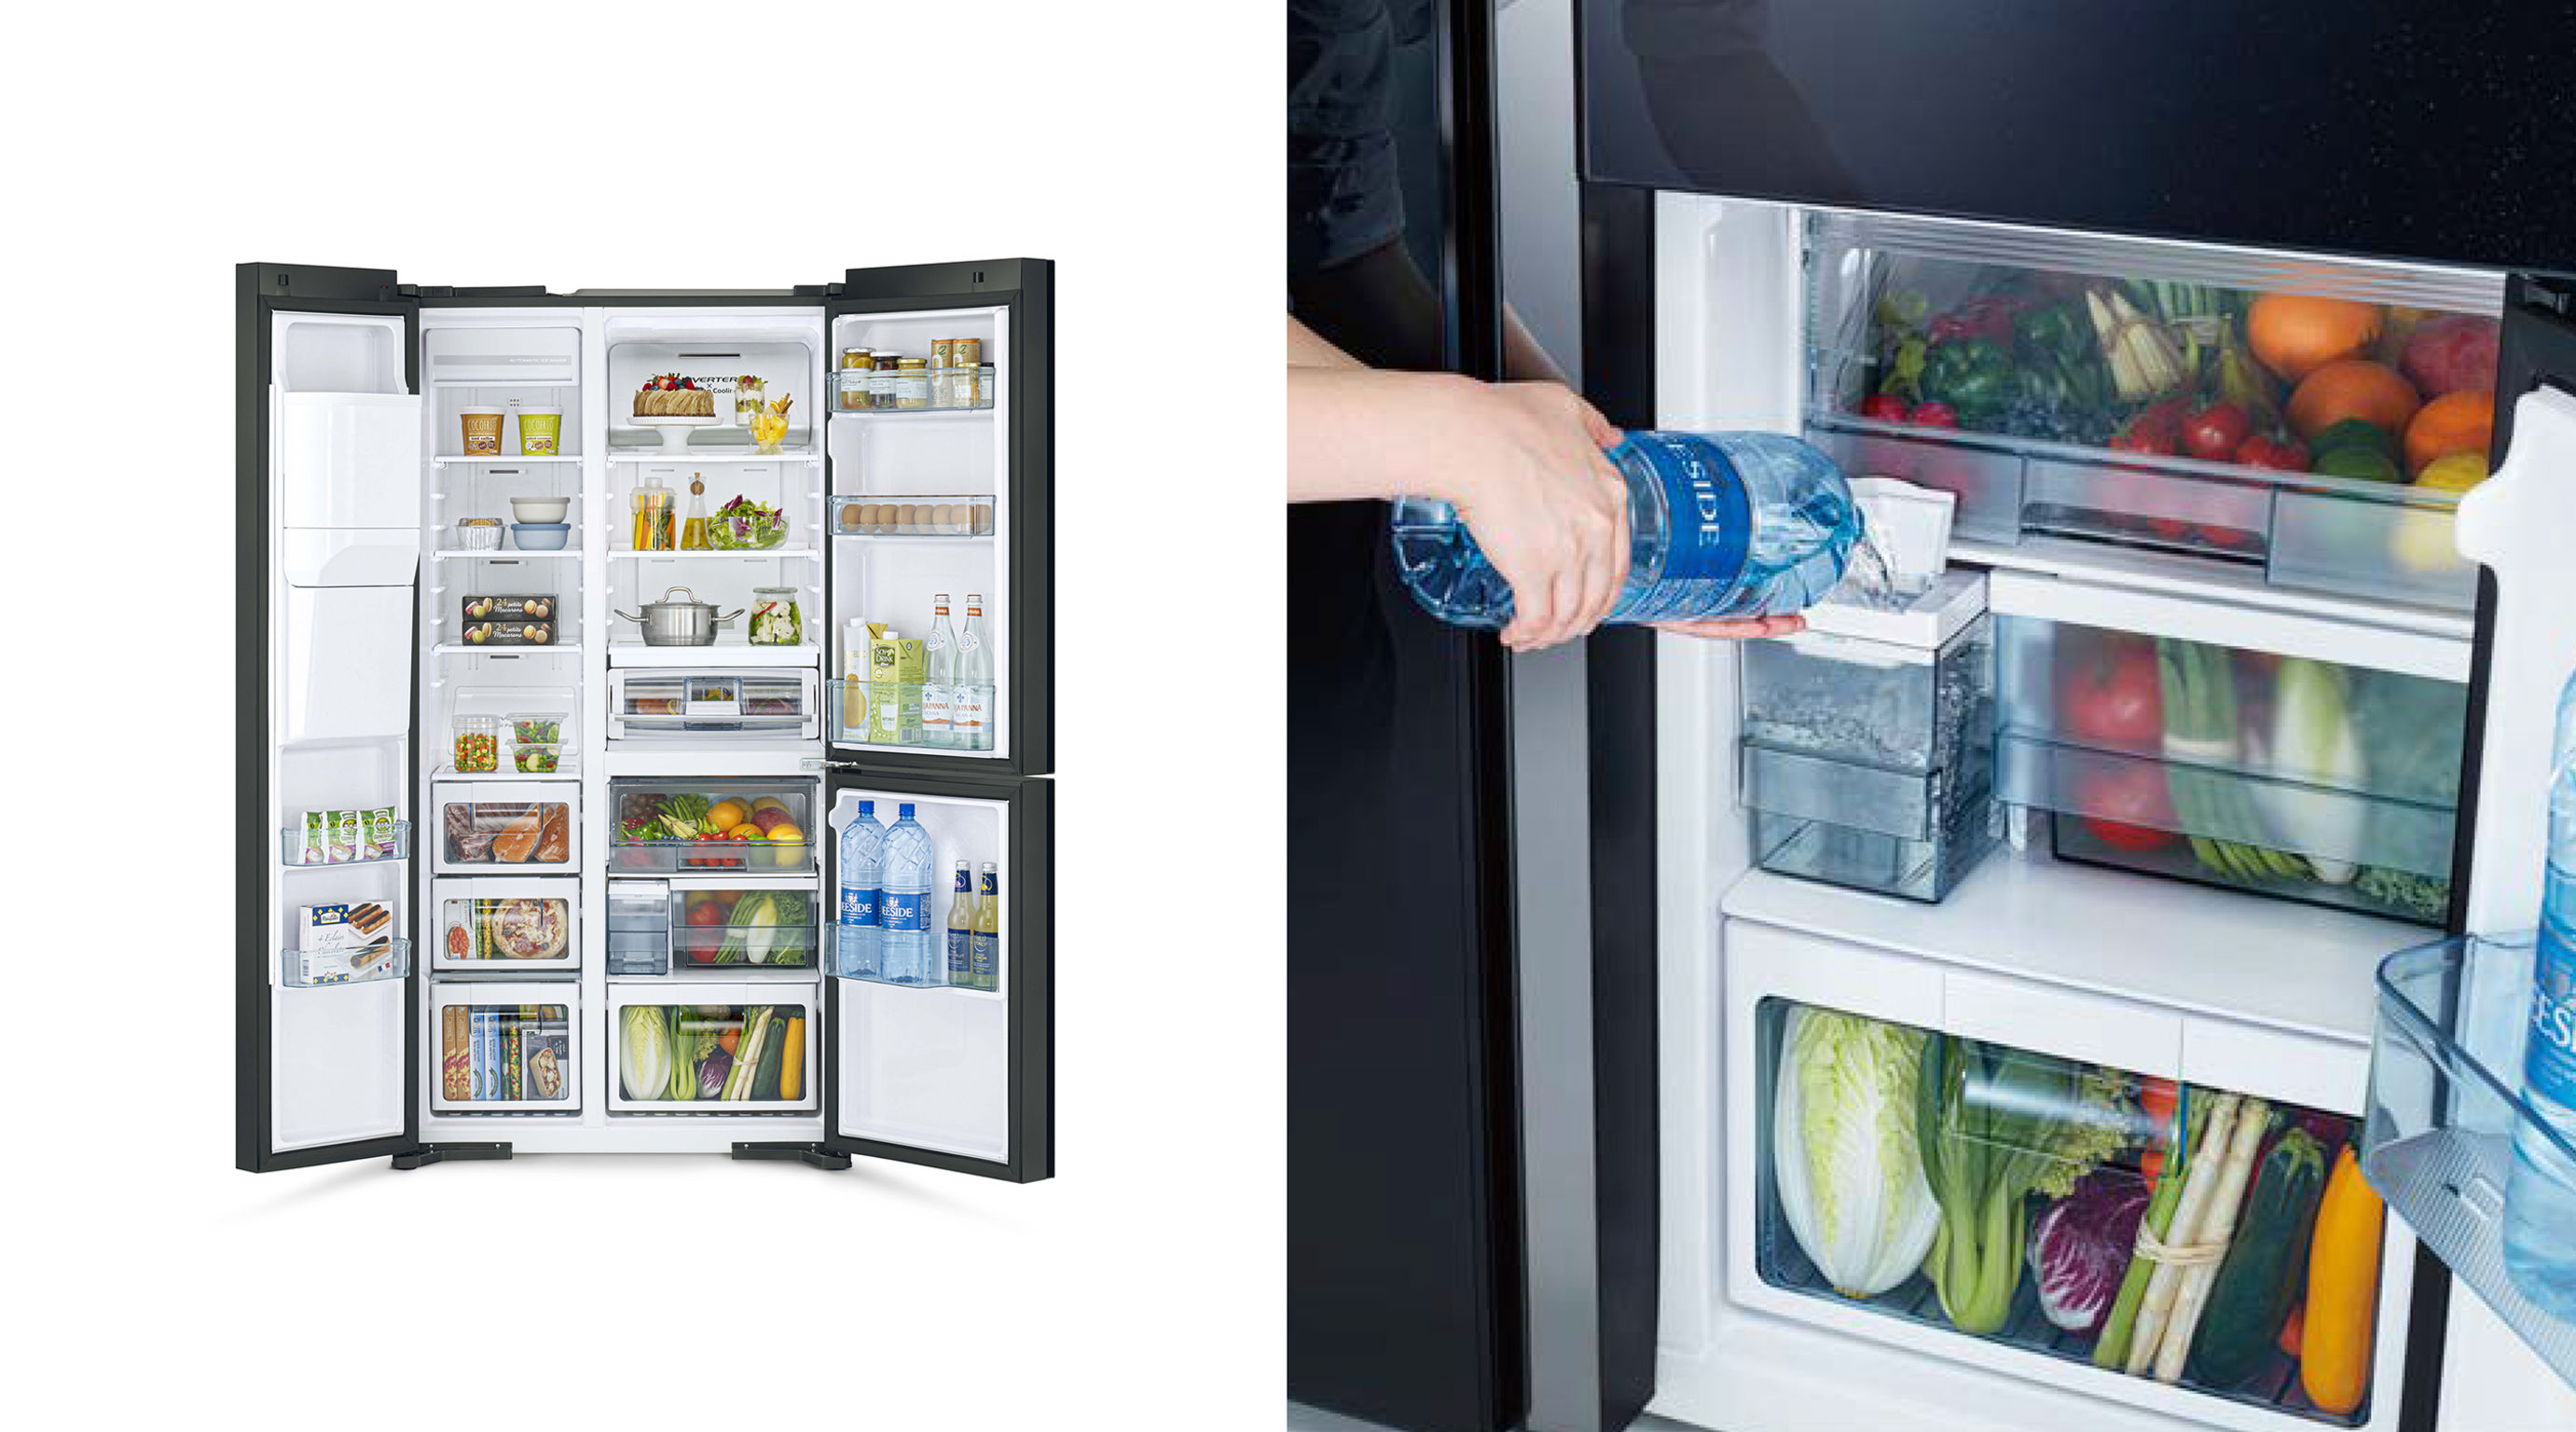 Hitachi Refrigerator Side by Side Series